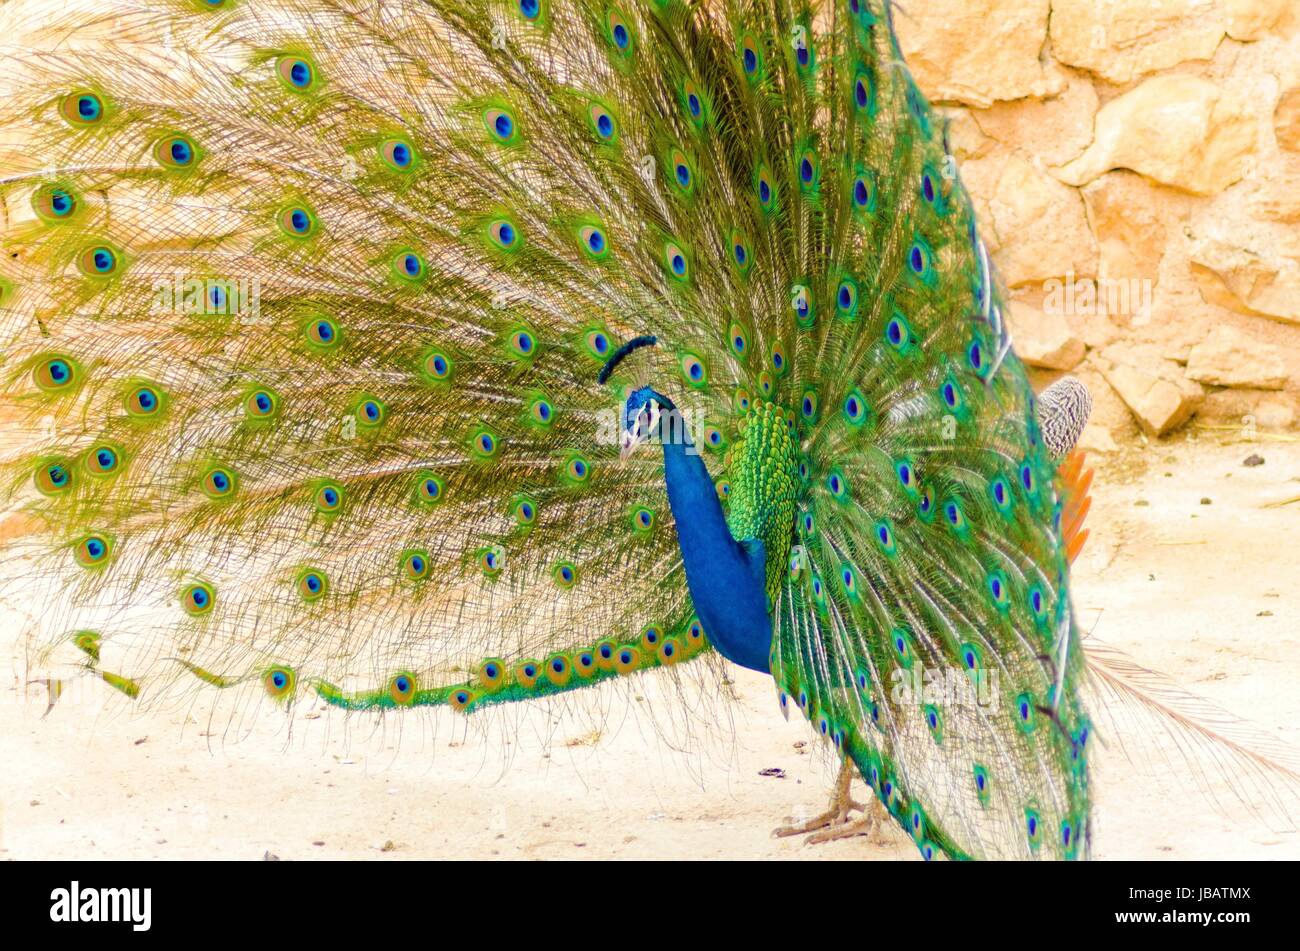 A profile view of a male peacock displaying. Male peafowls are distinct for their bright metalic blue crown, the fan shaped crest on the head and the elongated upper tail covets on their train made up of eye spot feathers. Stock Photo